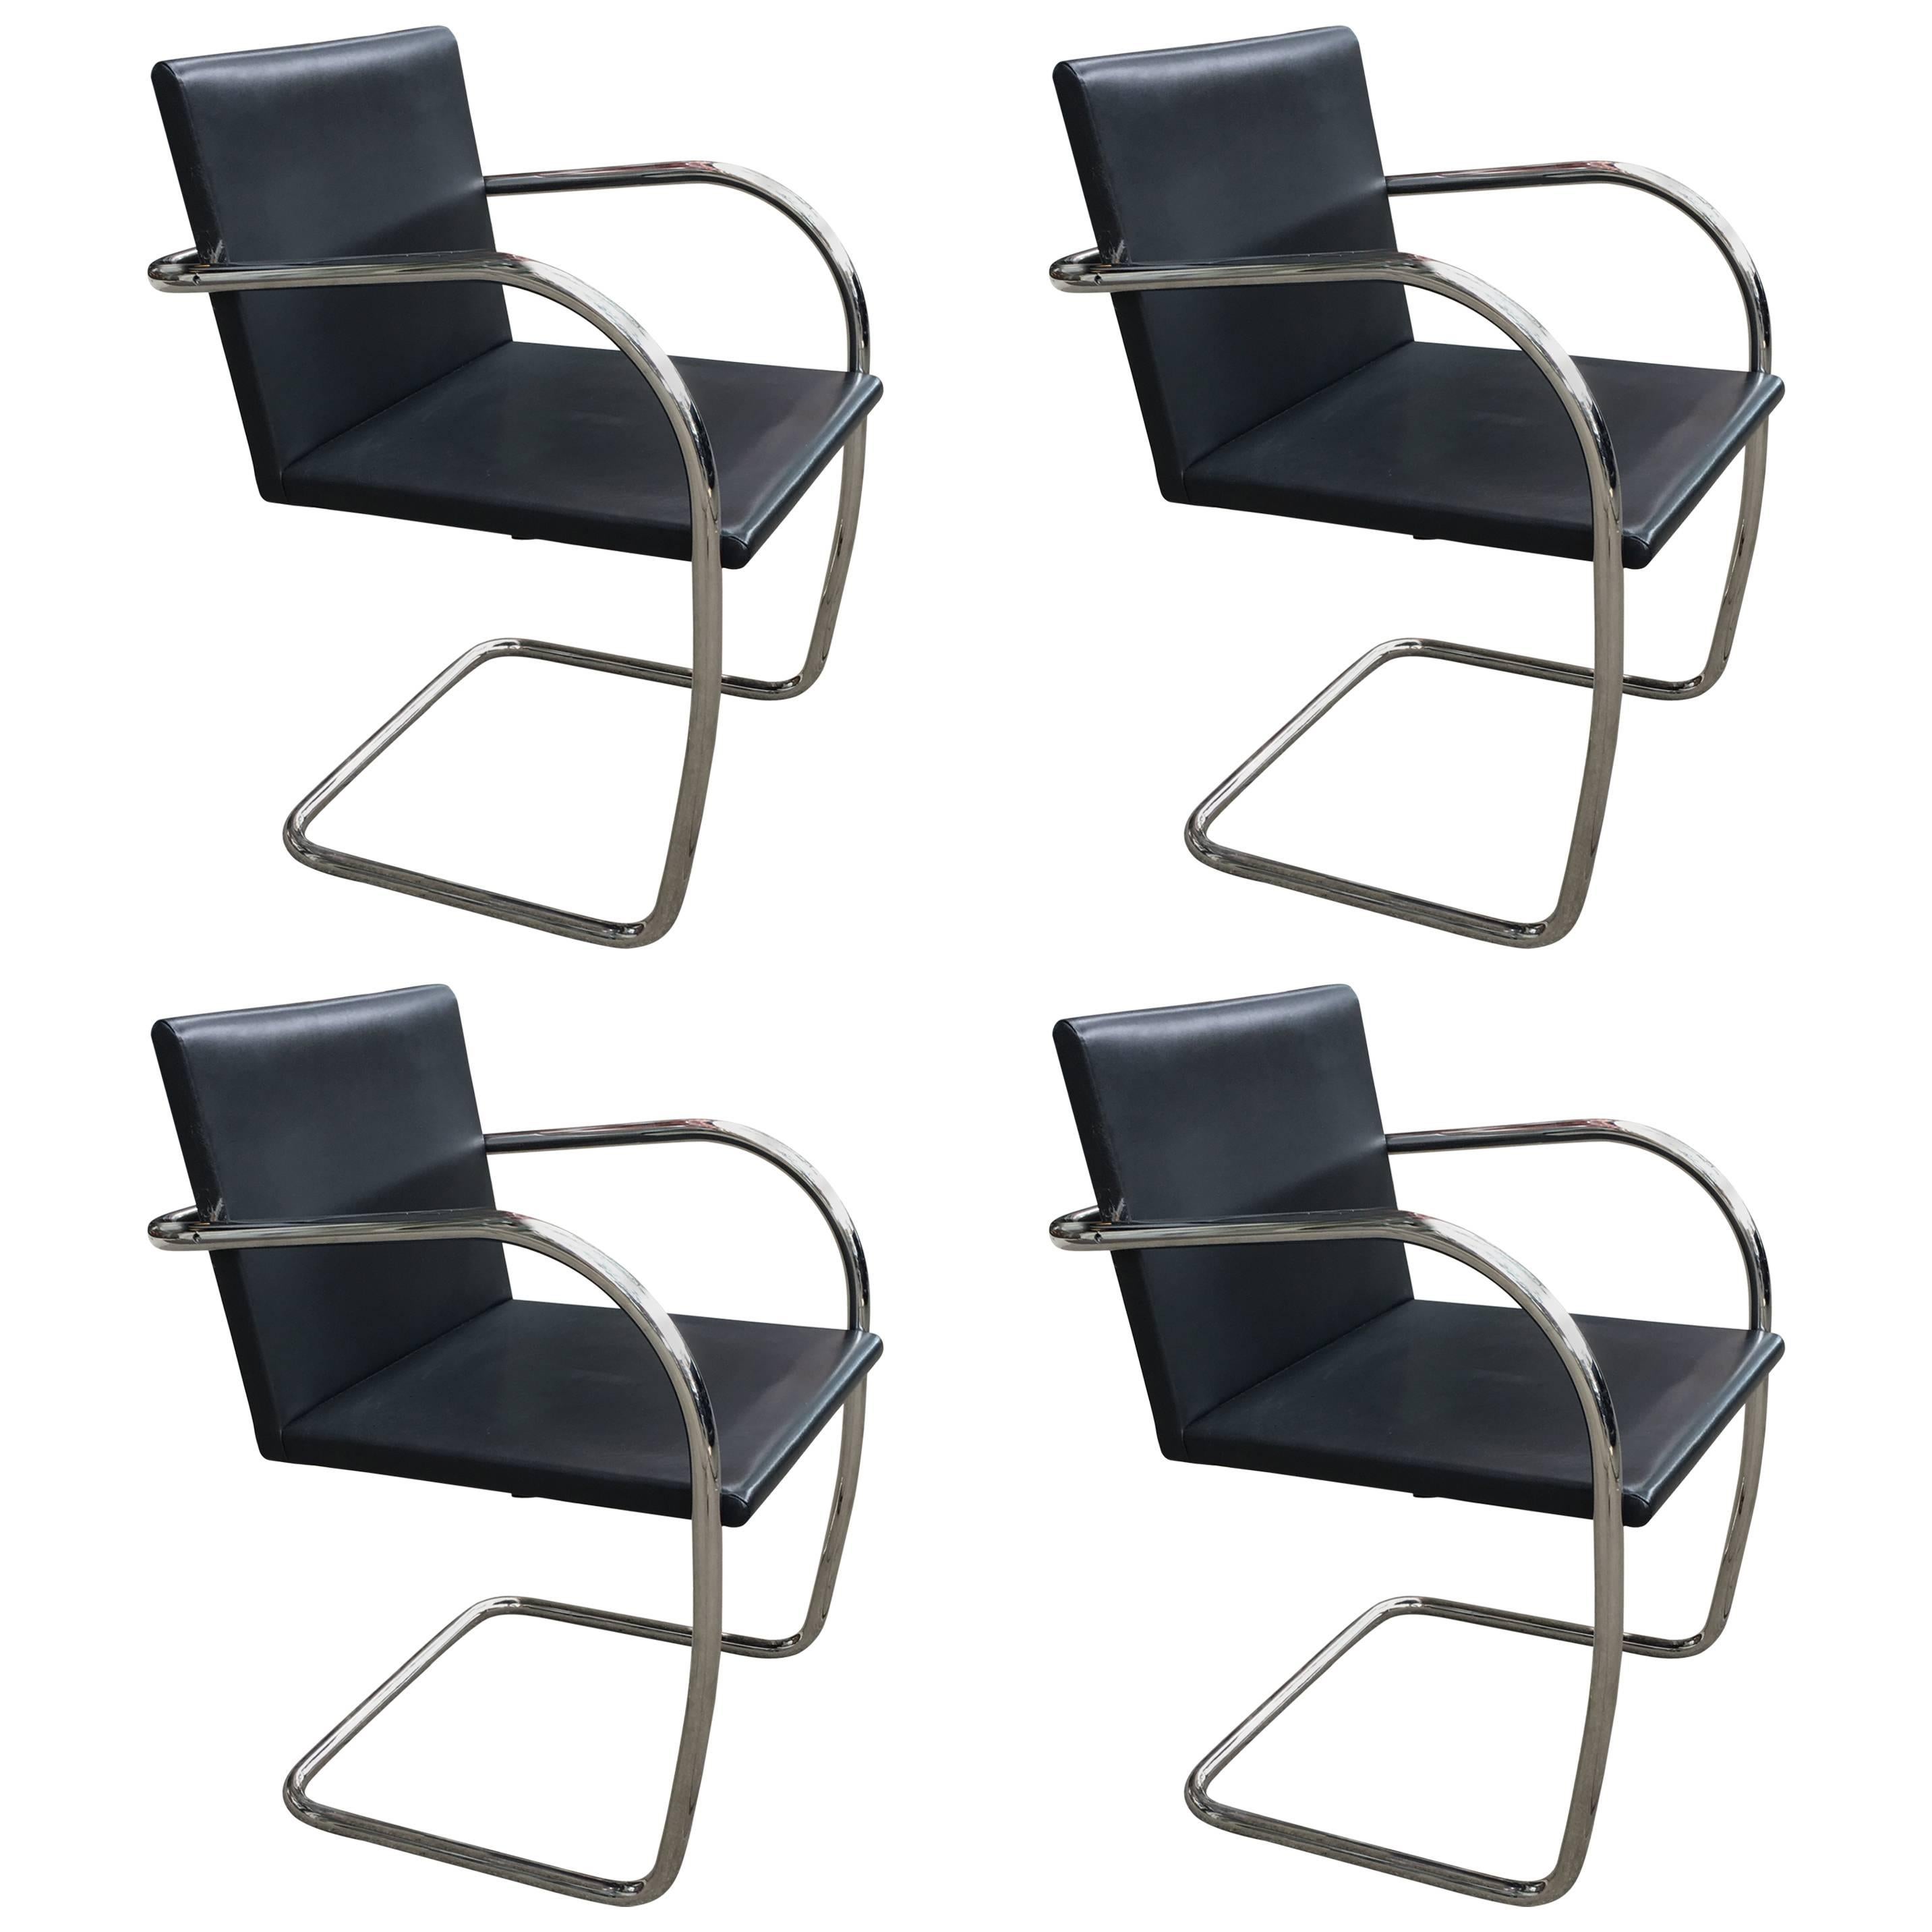 Ludwig Mies van der Rohe Brno Chairs, Set of Four, Knoll